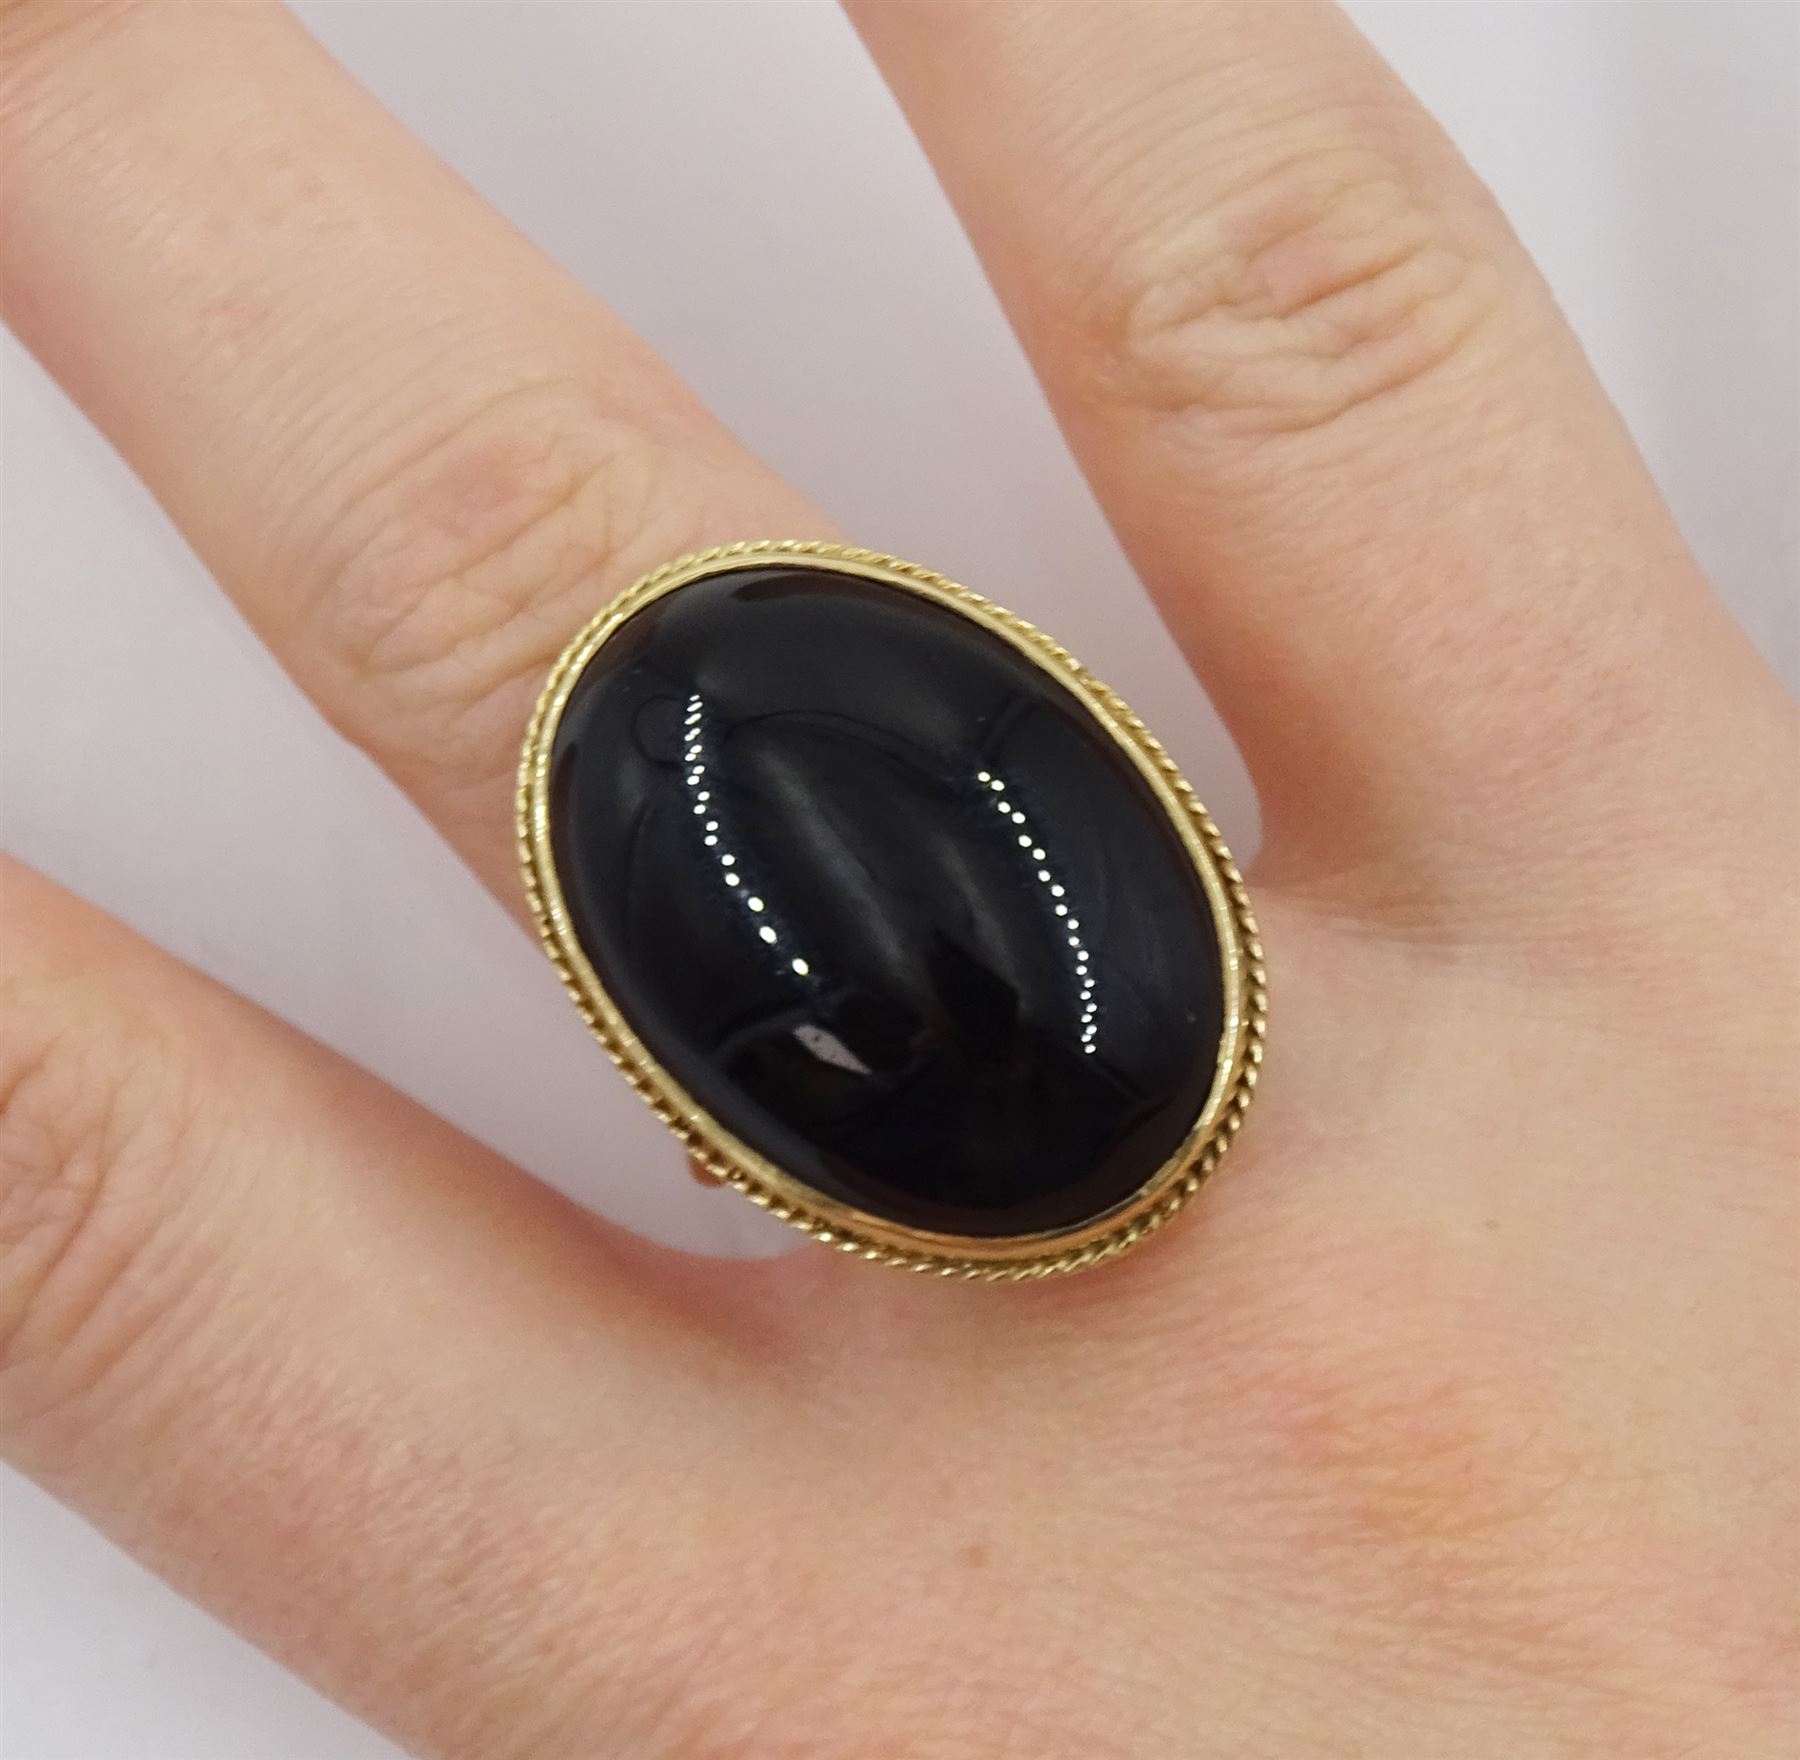 9ct gold oval black onyx ring - Image 2 of 4